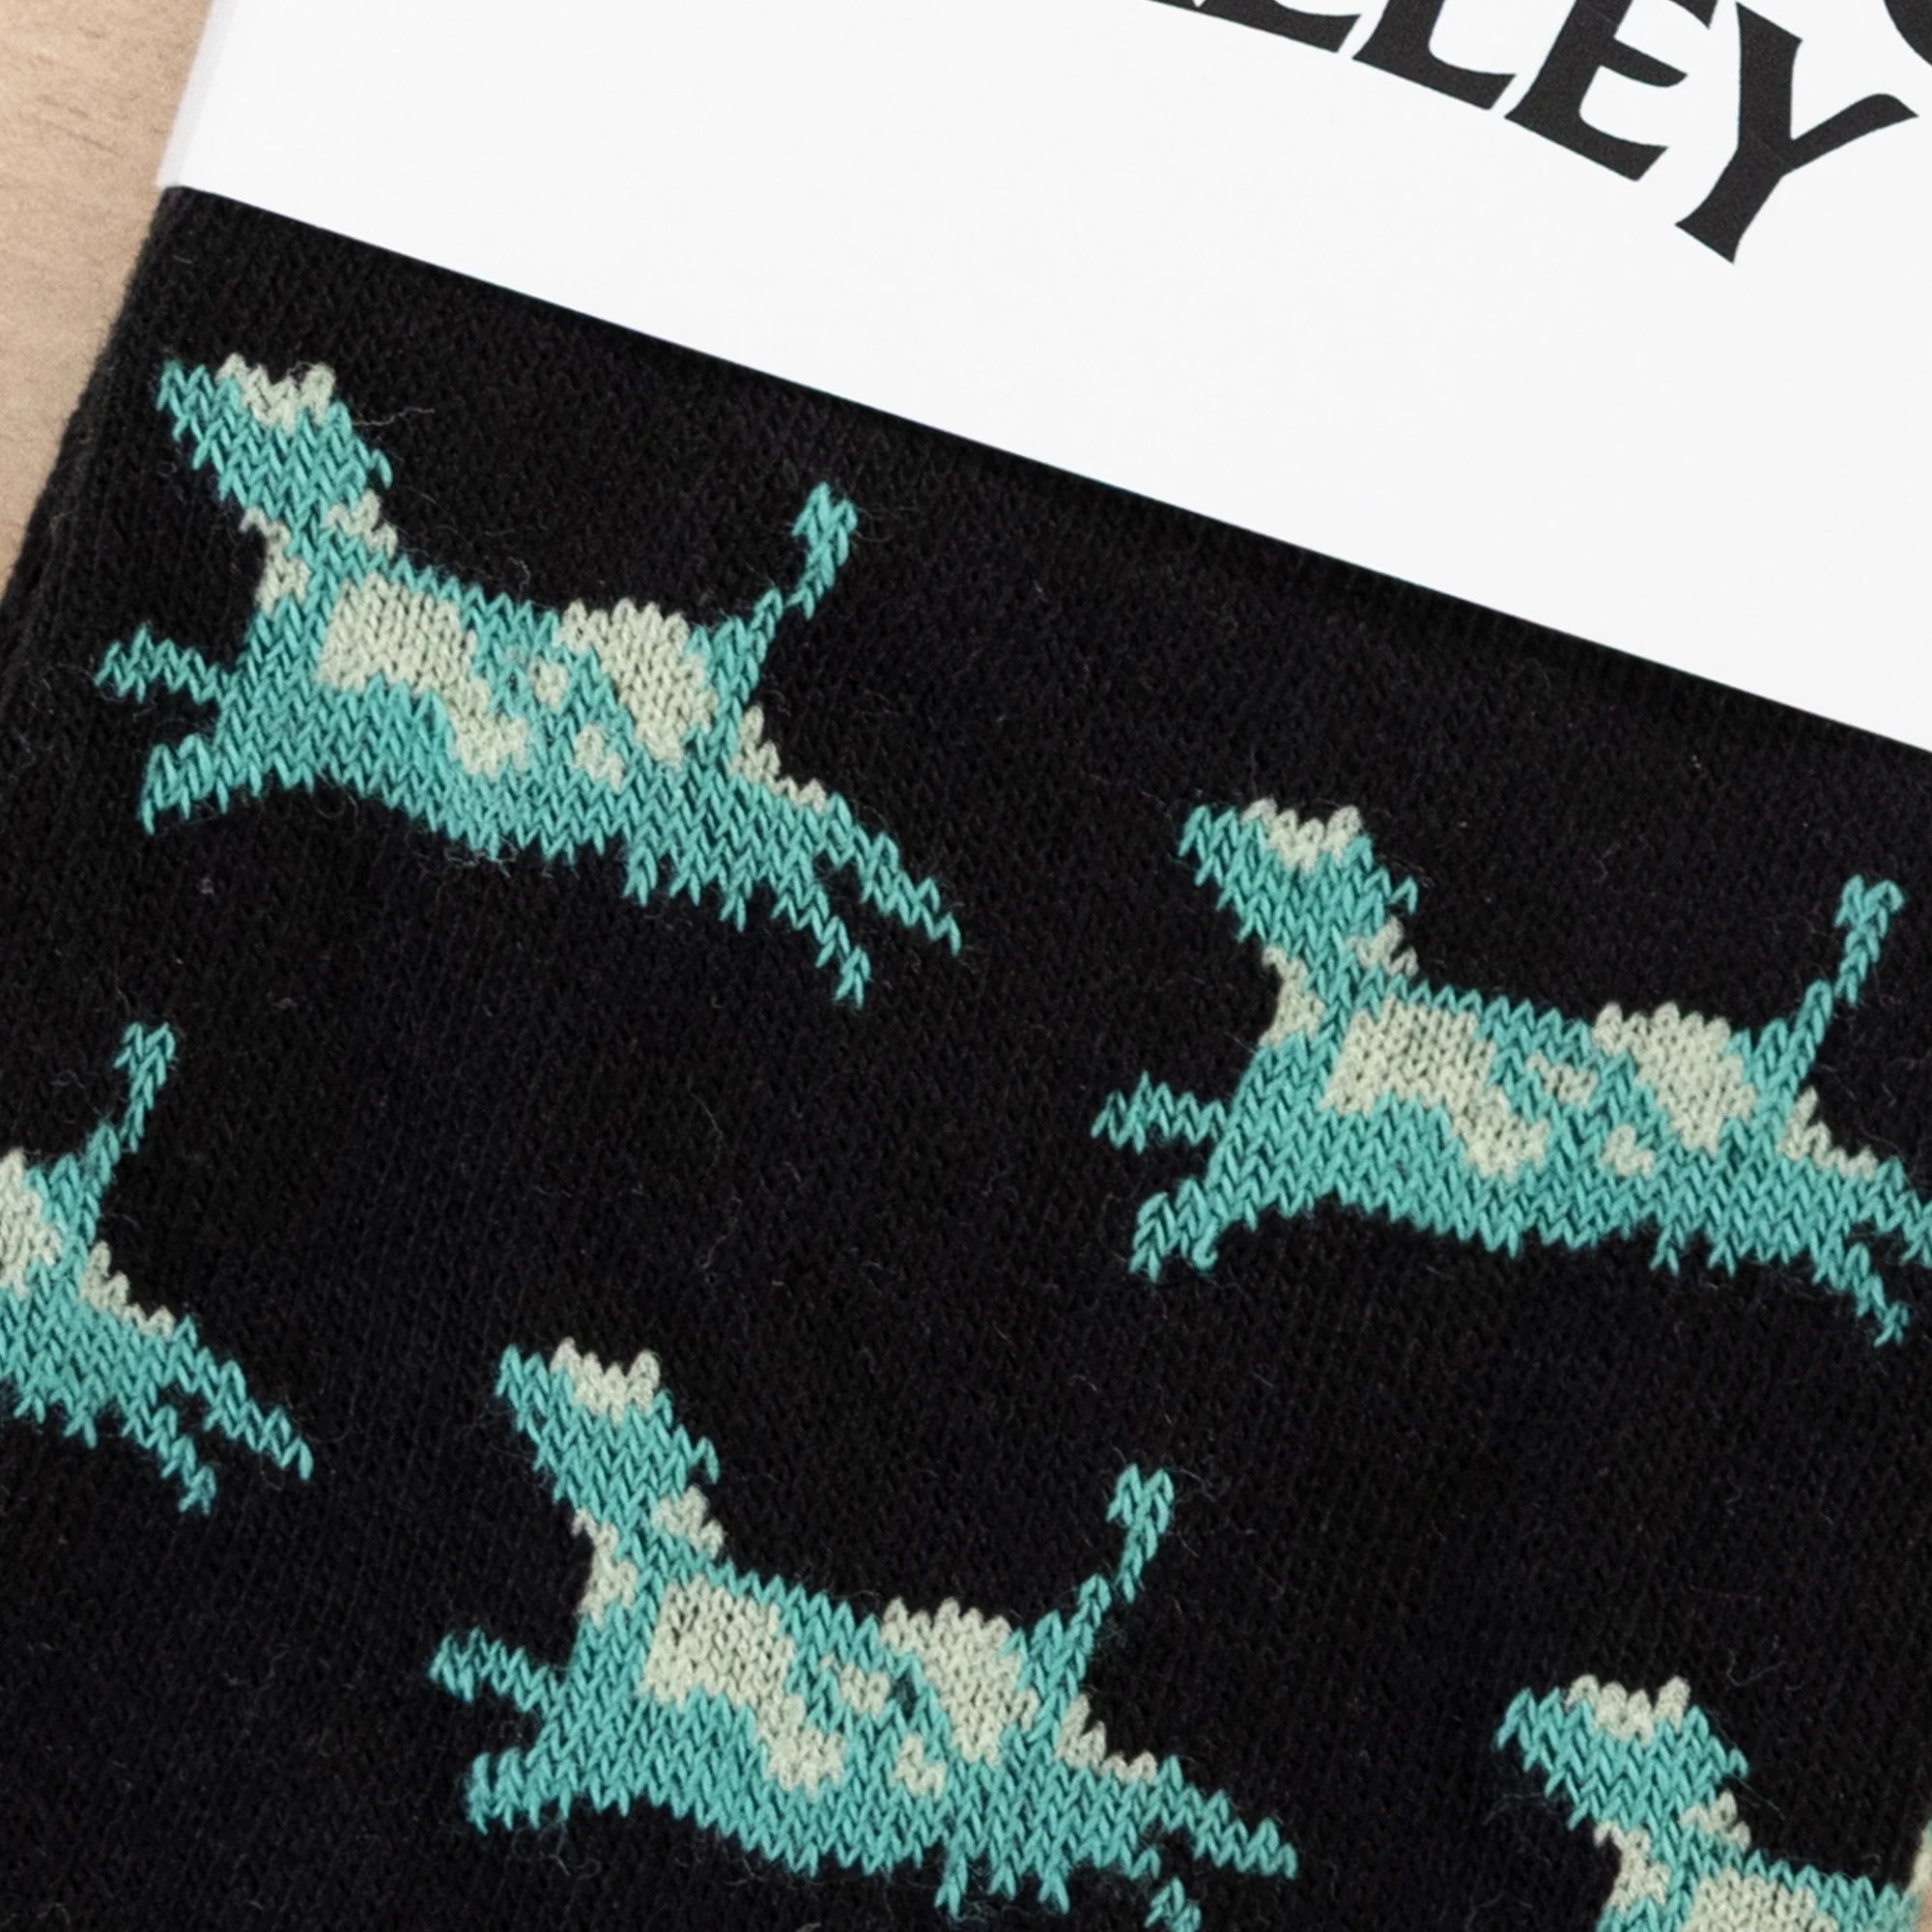 Leaping Cow Socks in Black w/ Green Cows color